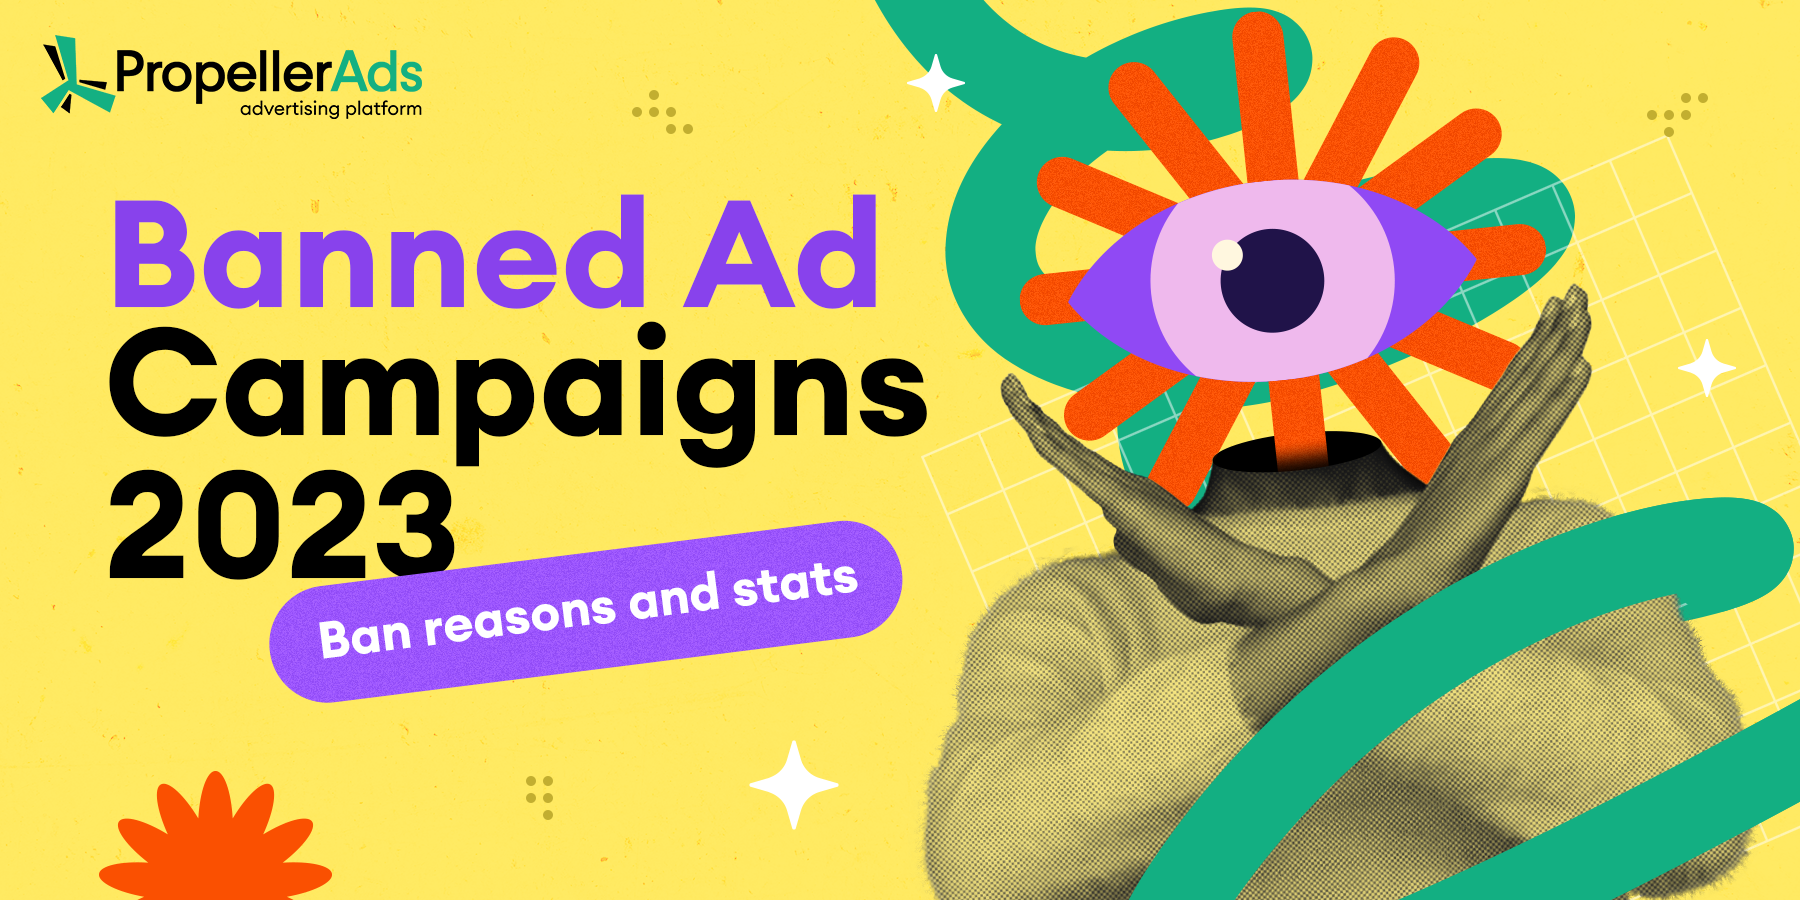 Banned campaigns and advertisers in 2023